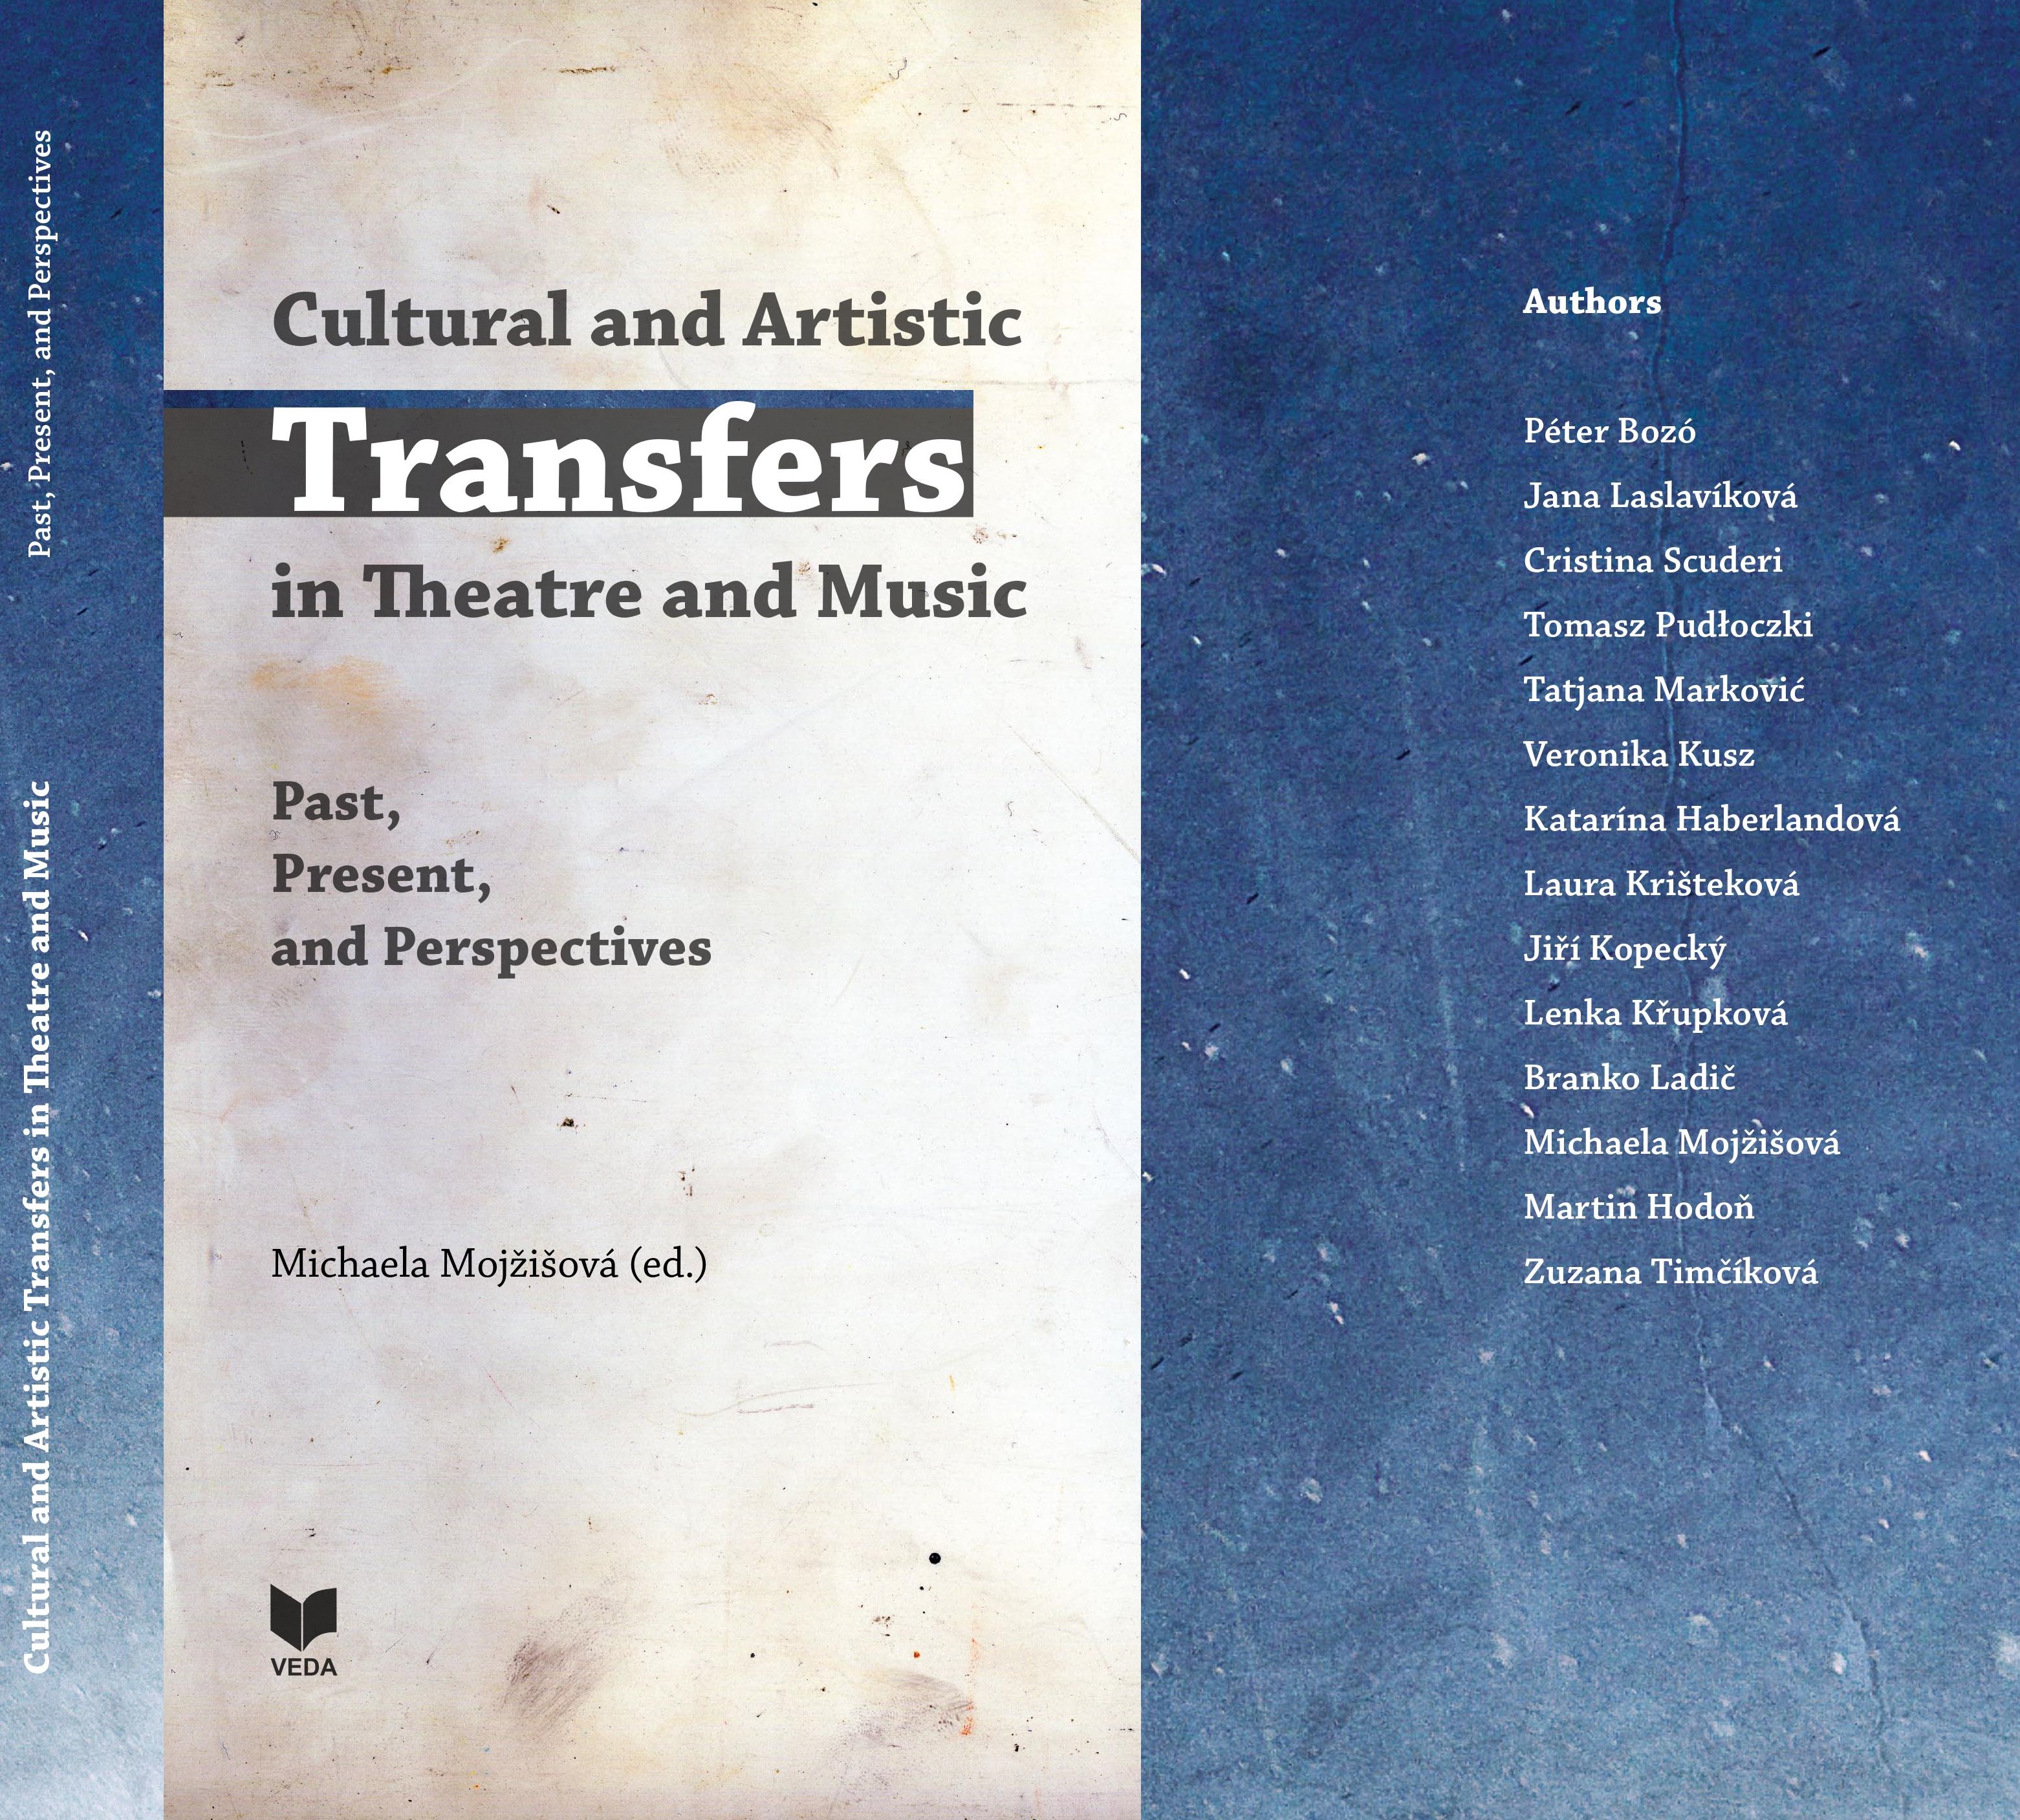 Cultural and Artistic Transfers  in Theatre and Music